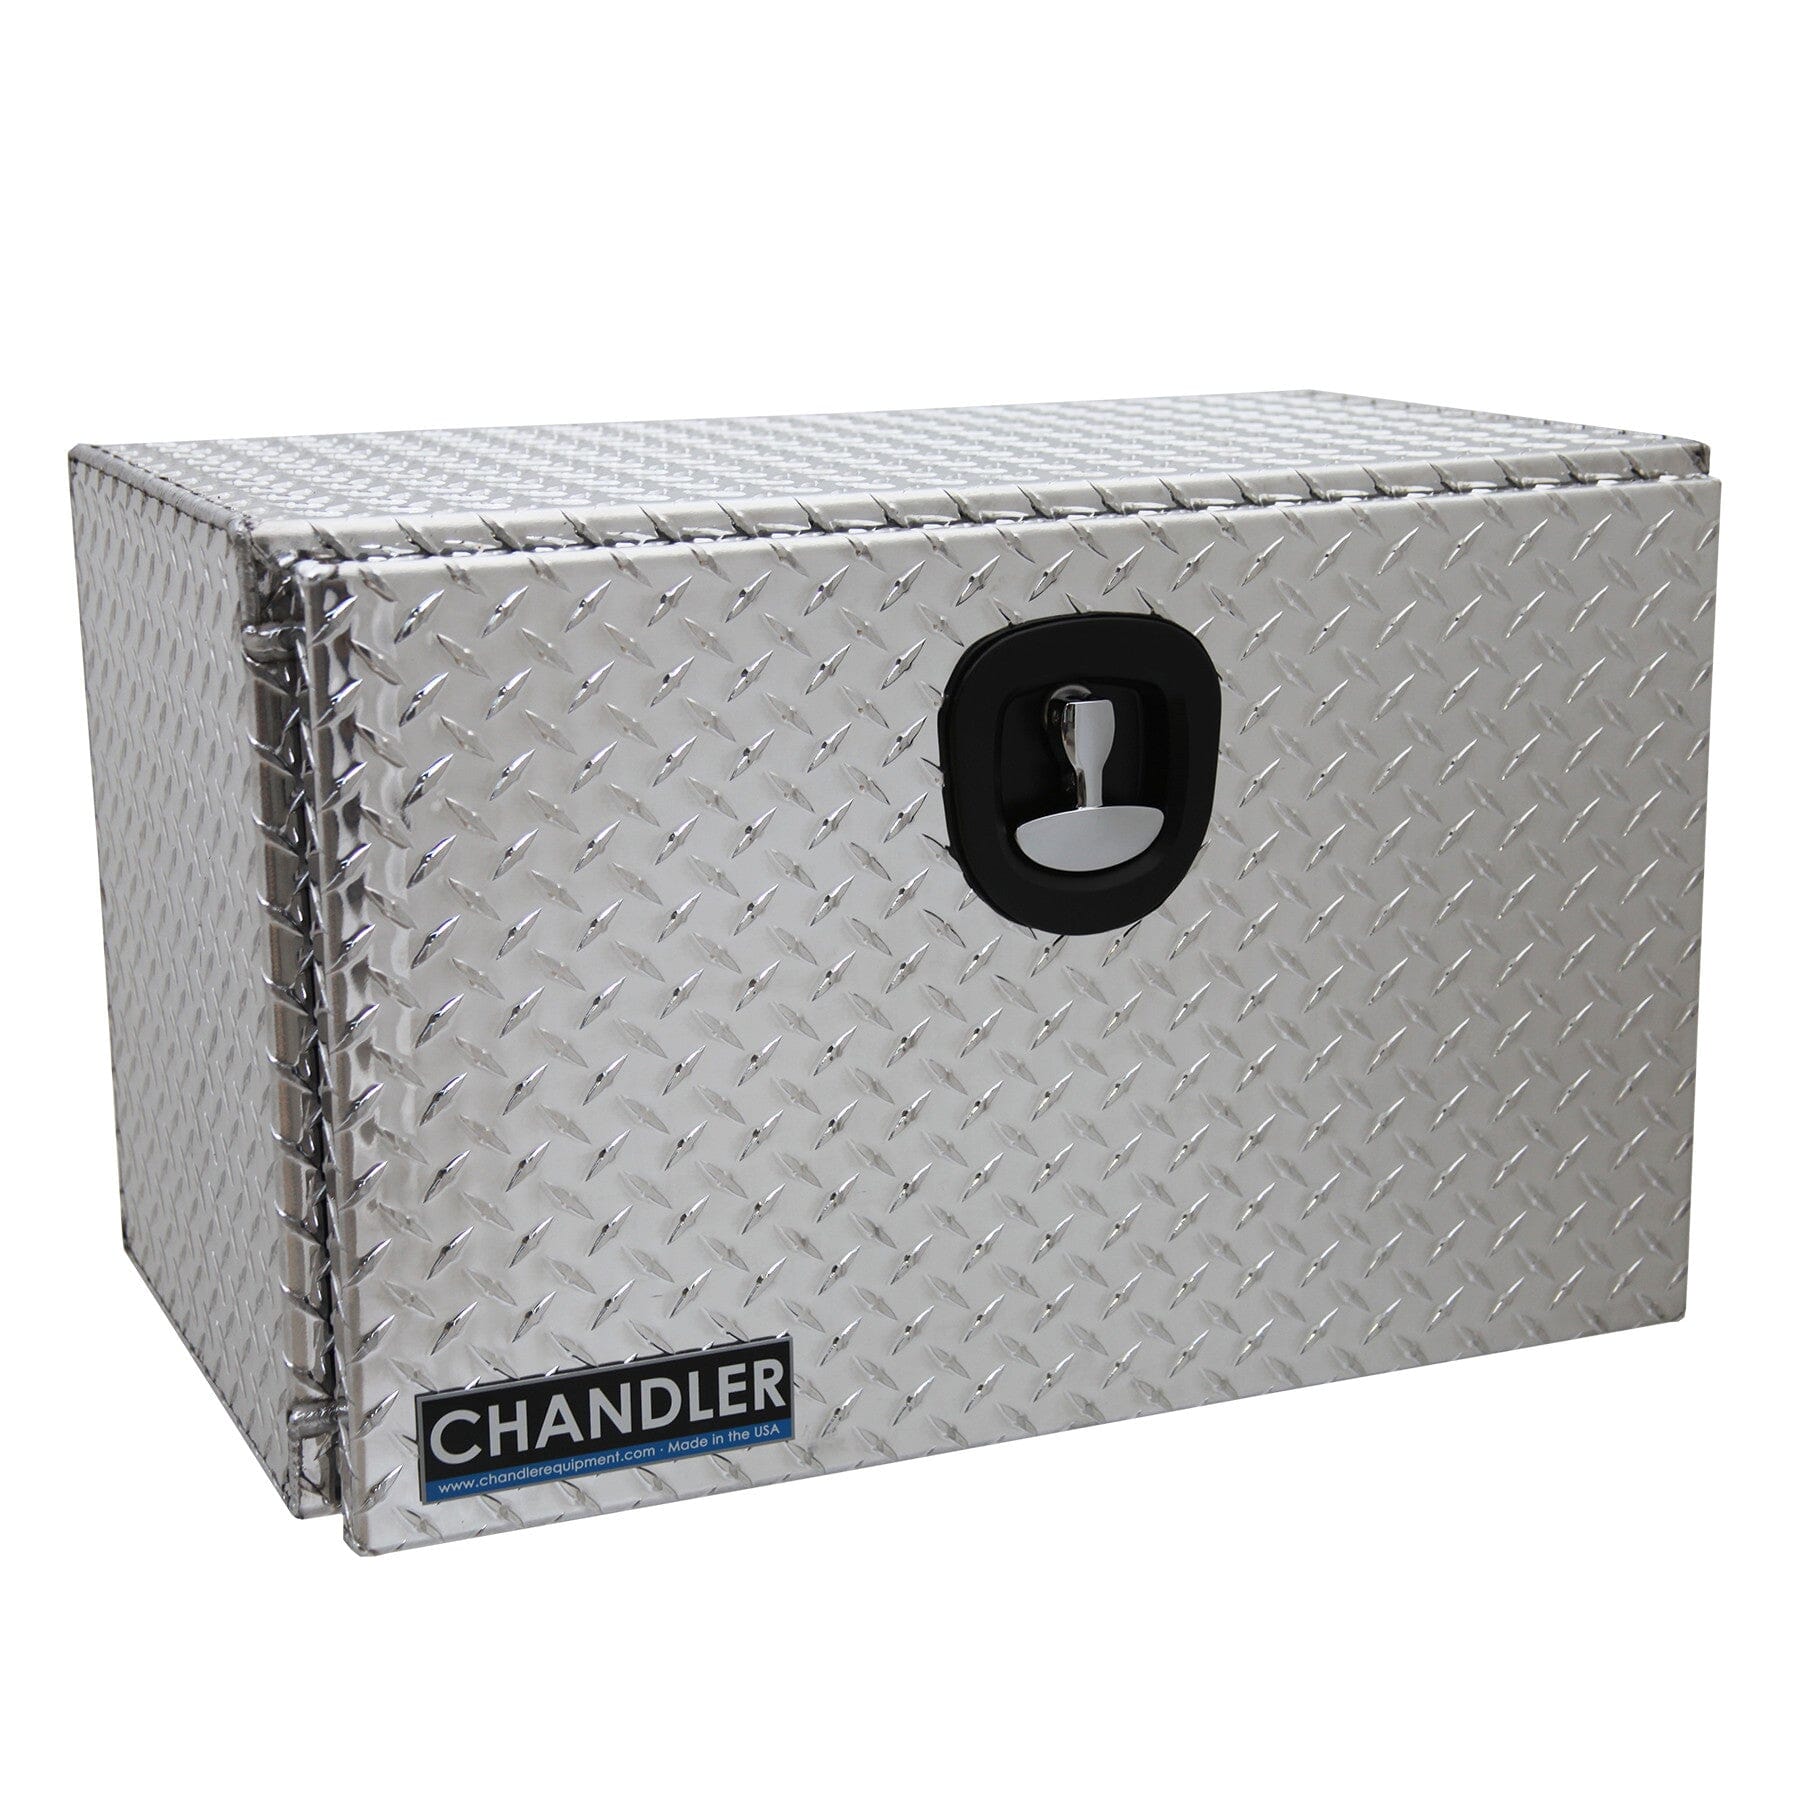 Image of Underbody Aluminum Tread Plate Toolbox Chandler Truck Accessories 18 X 18 X 30 - SINGLE LATCH | Chandler Truck Accessories